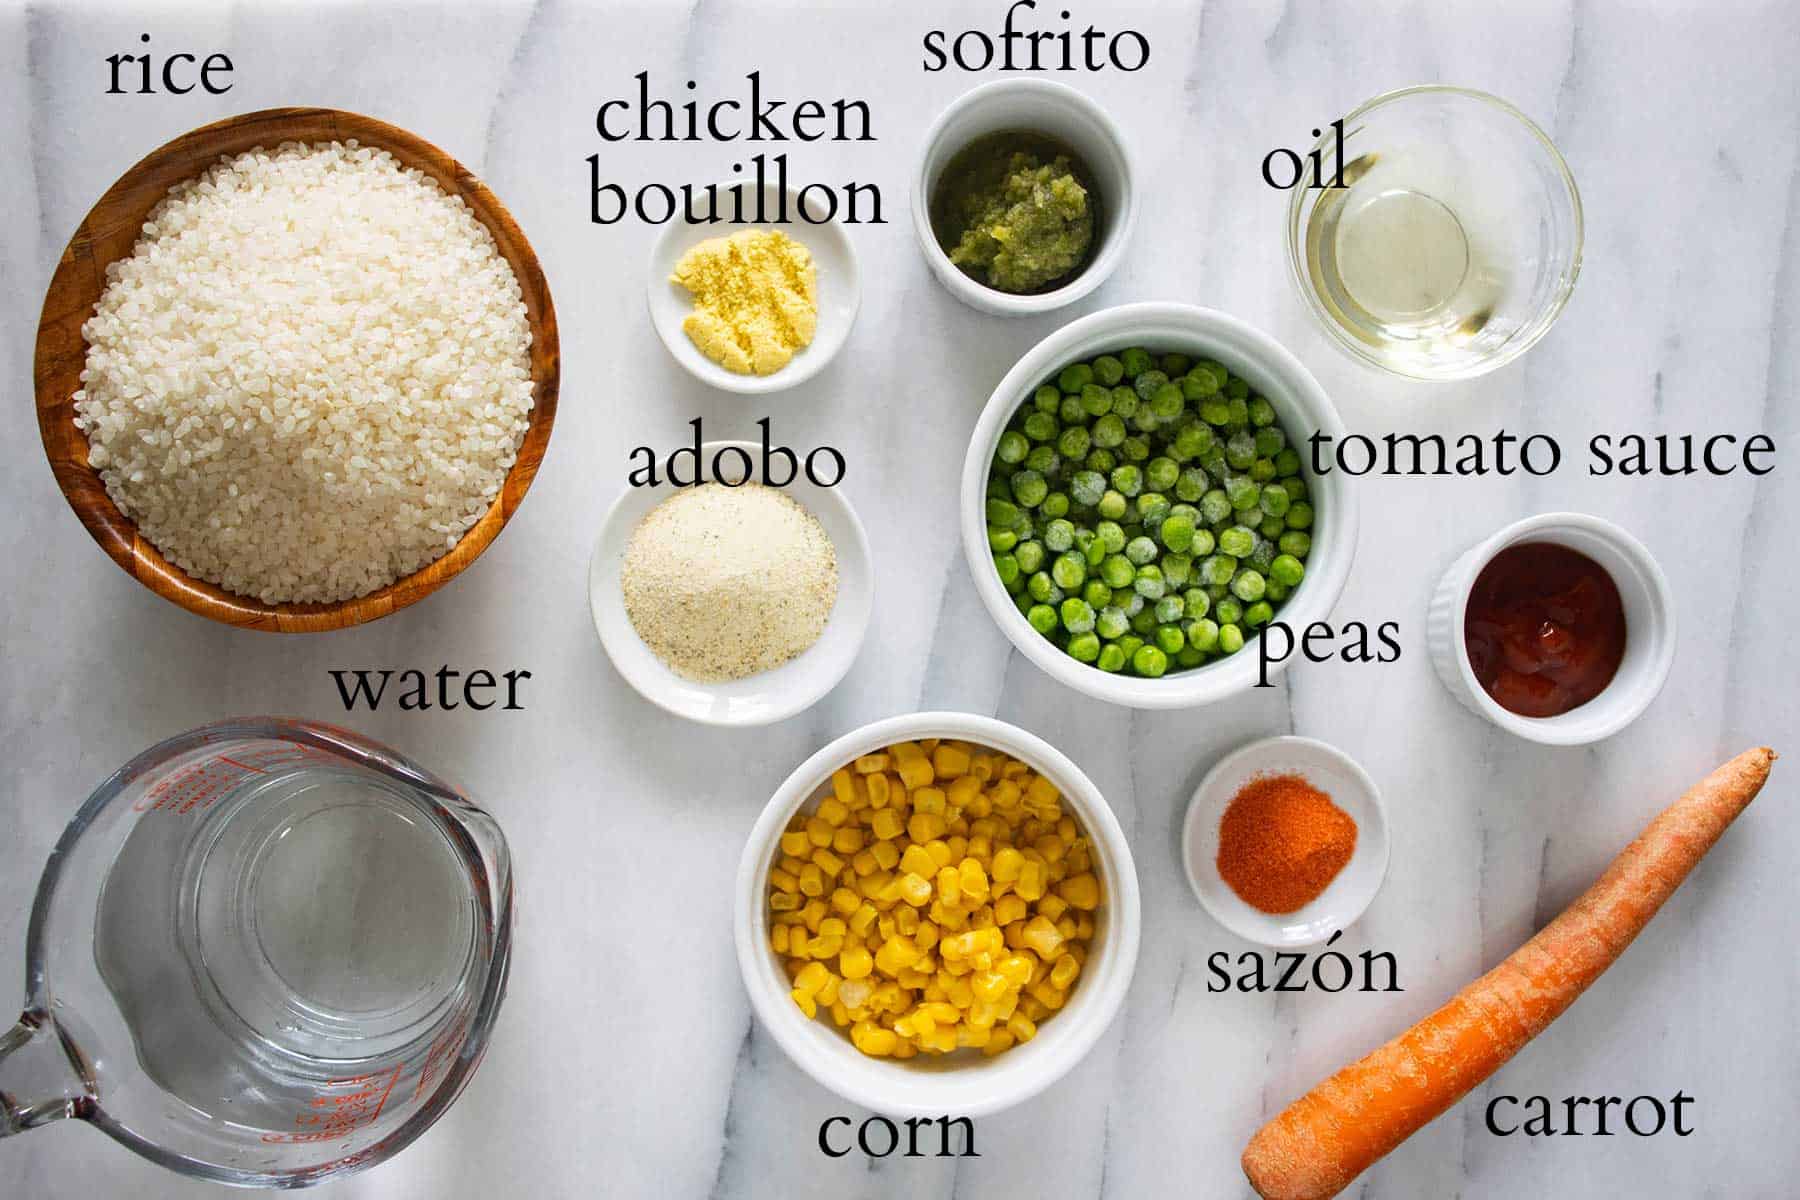 all the ingredients needed to make a vegetable rice.